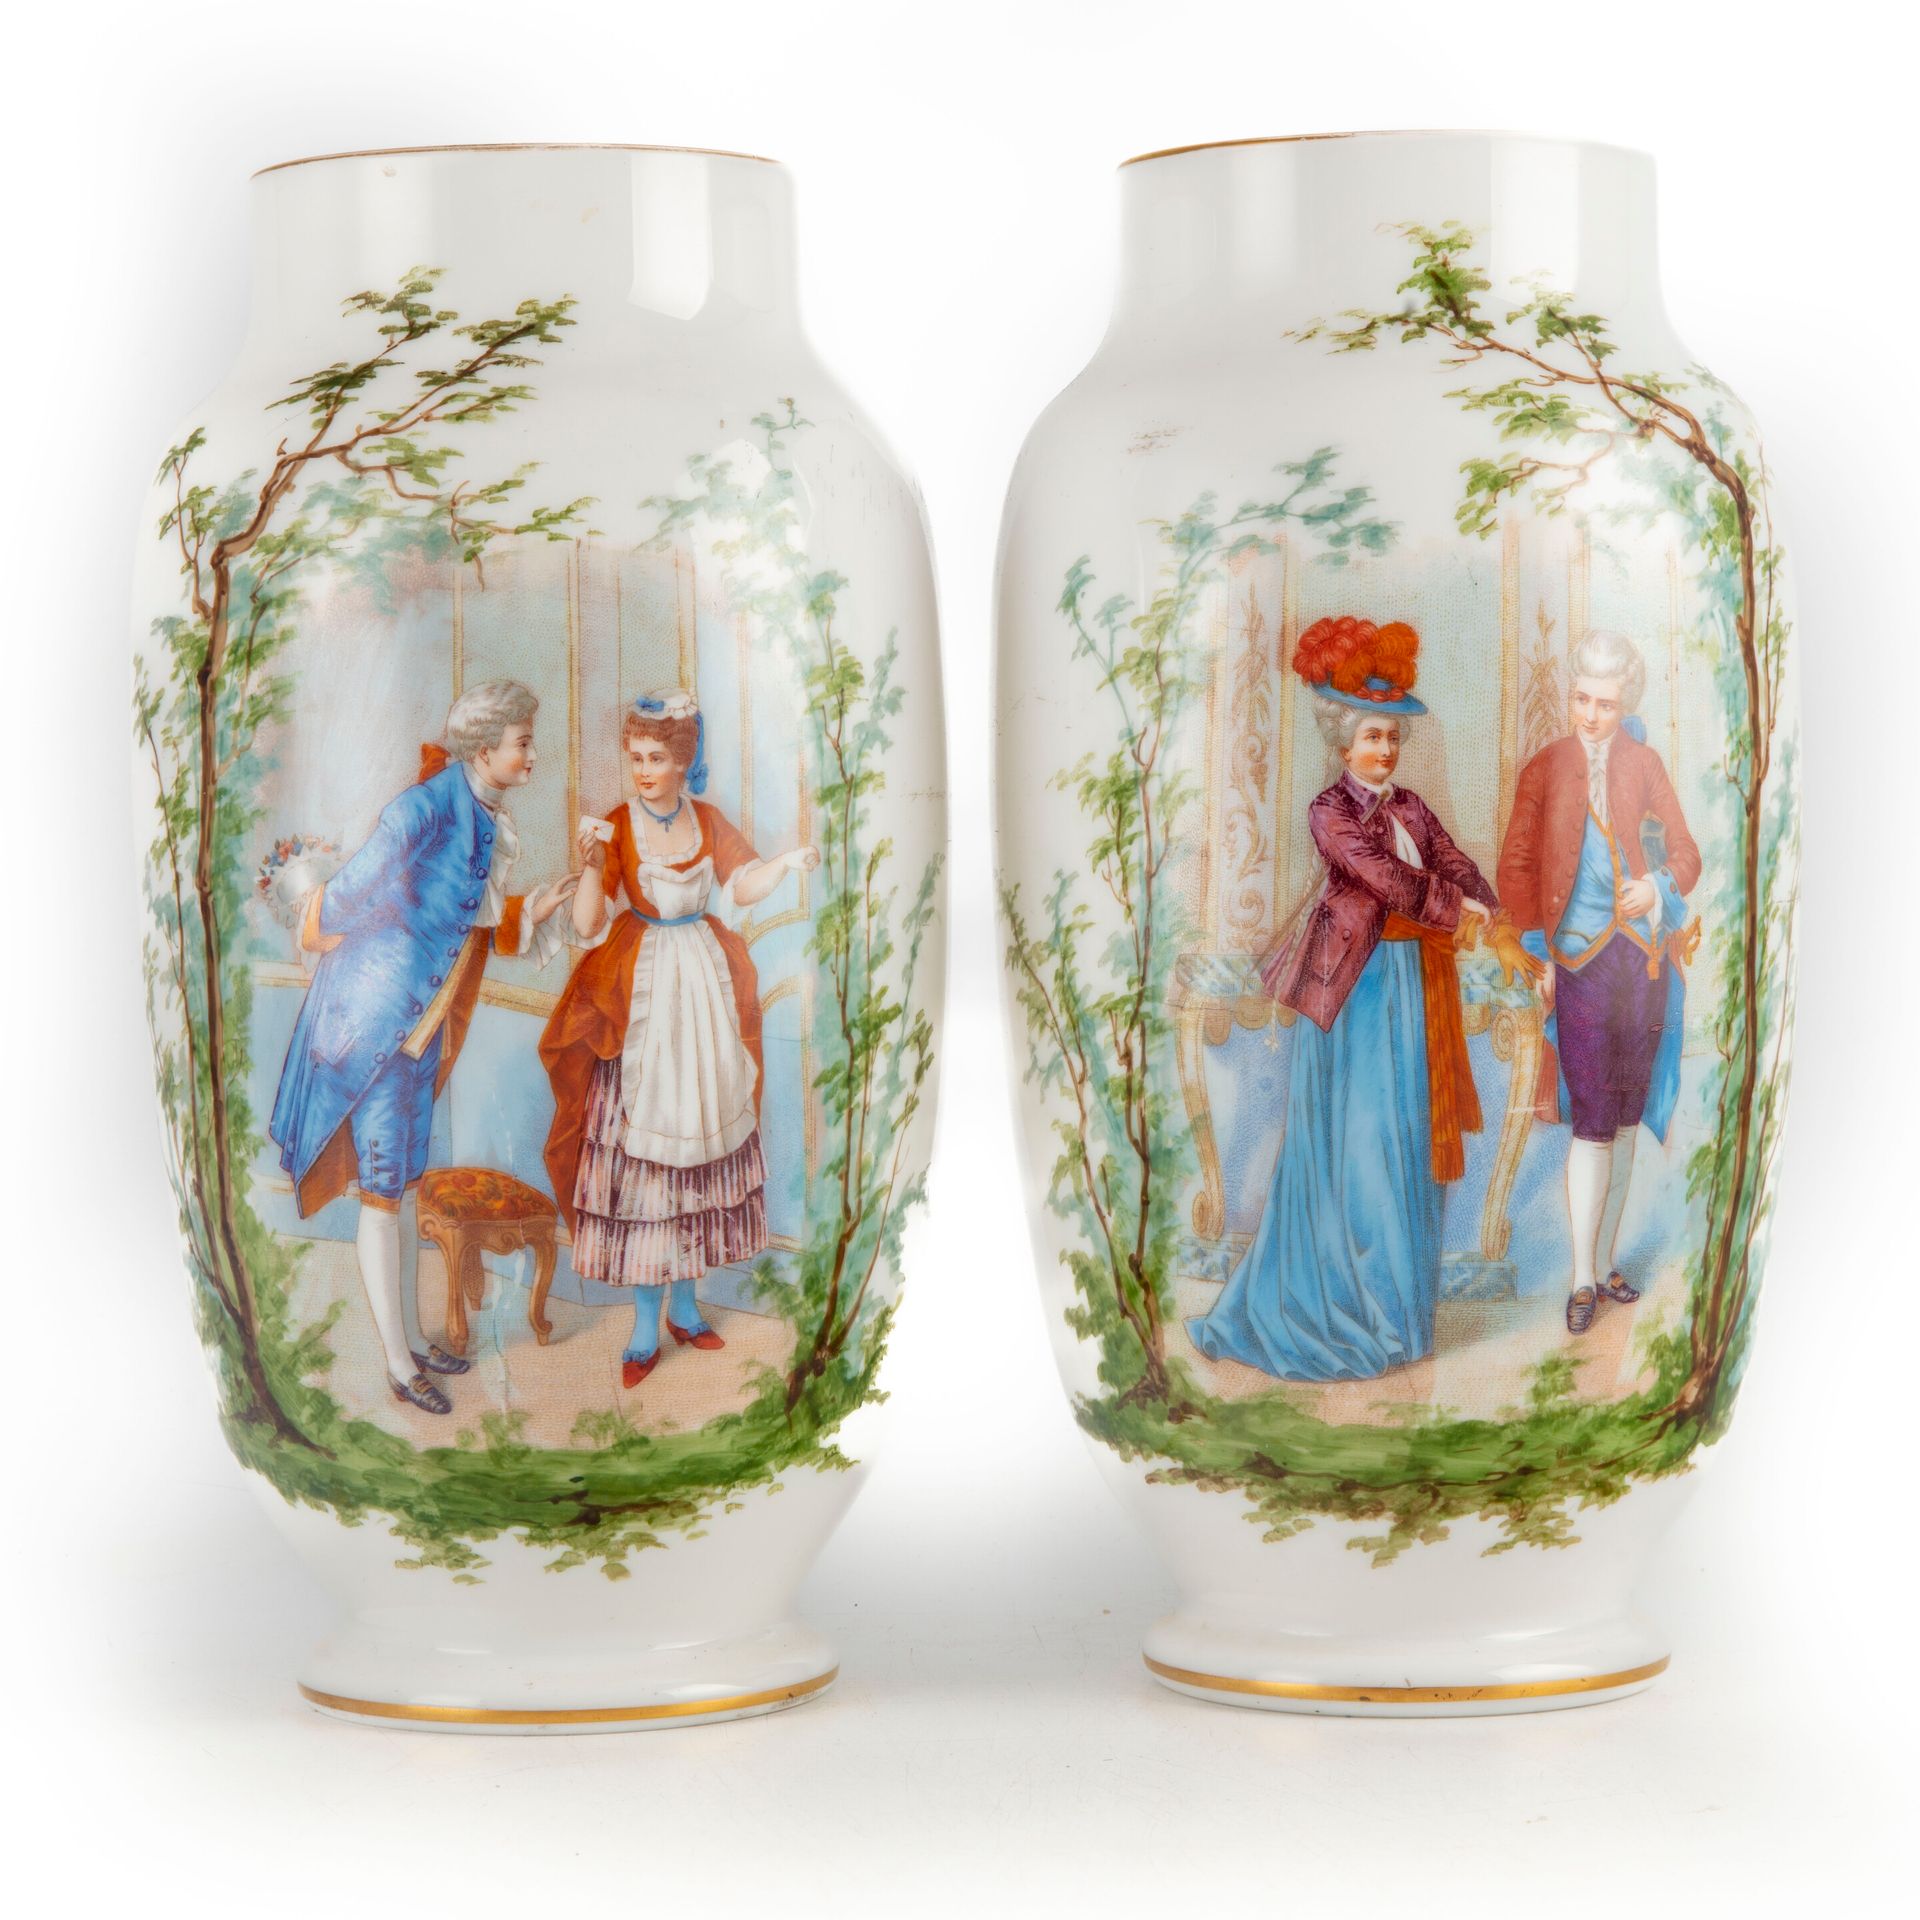 Null Pair of opaline vases decorated with gallant scenes

H.: 31 cm